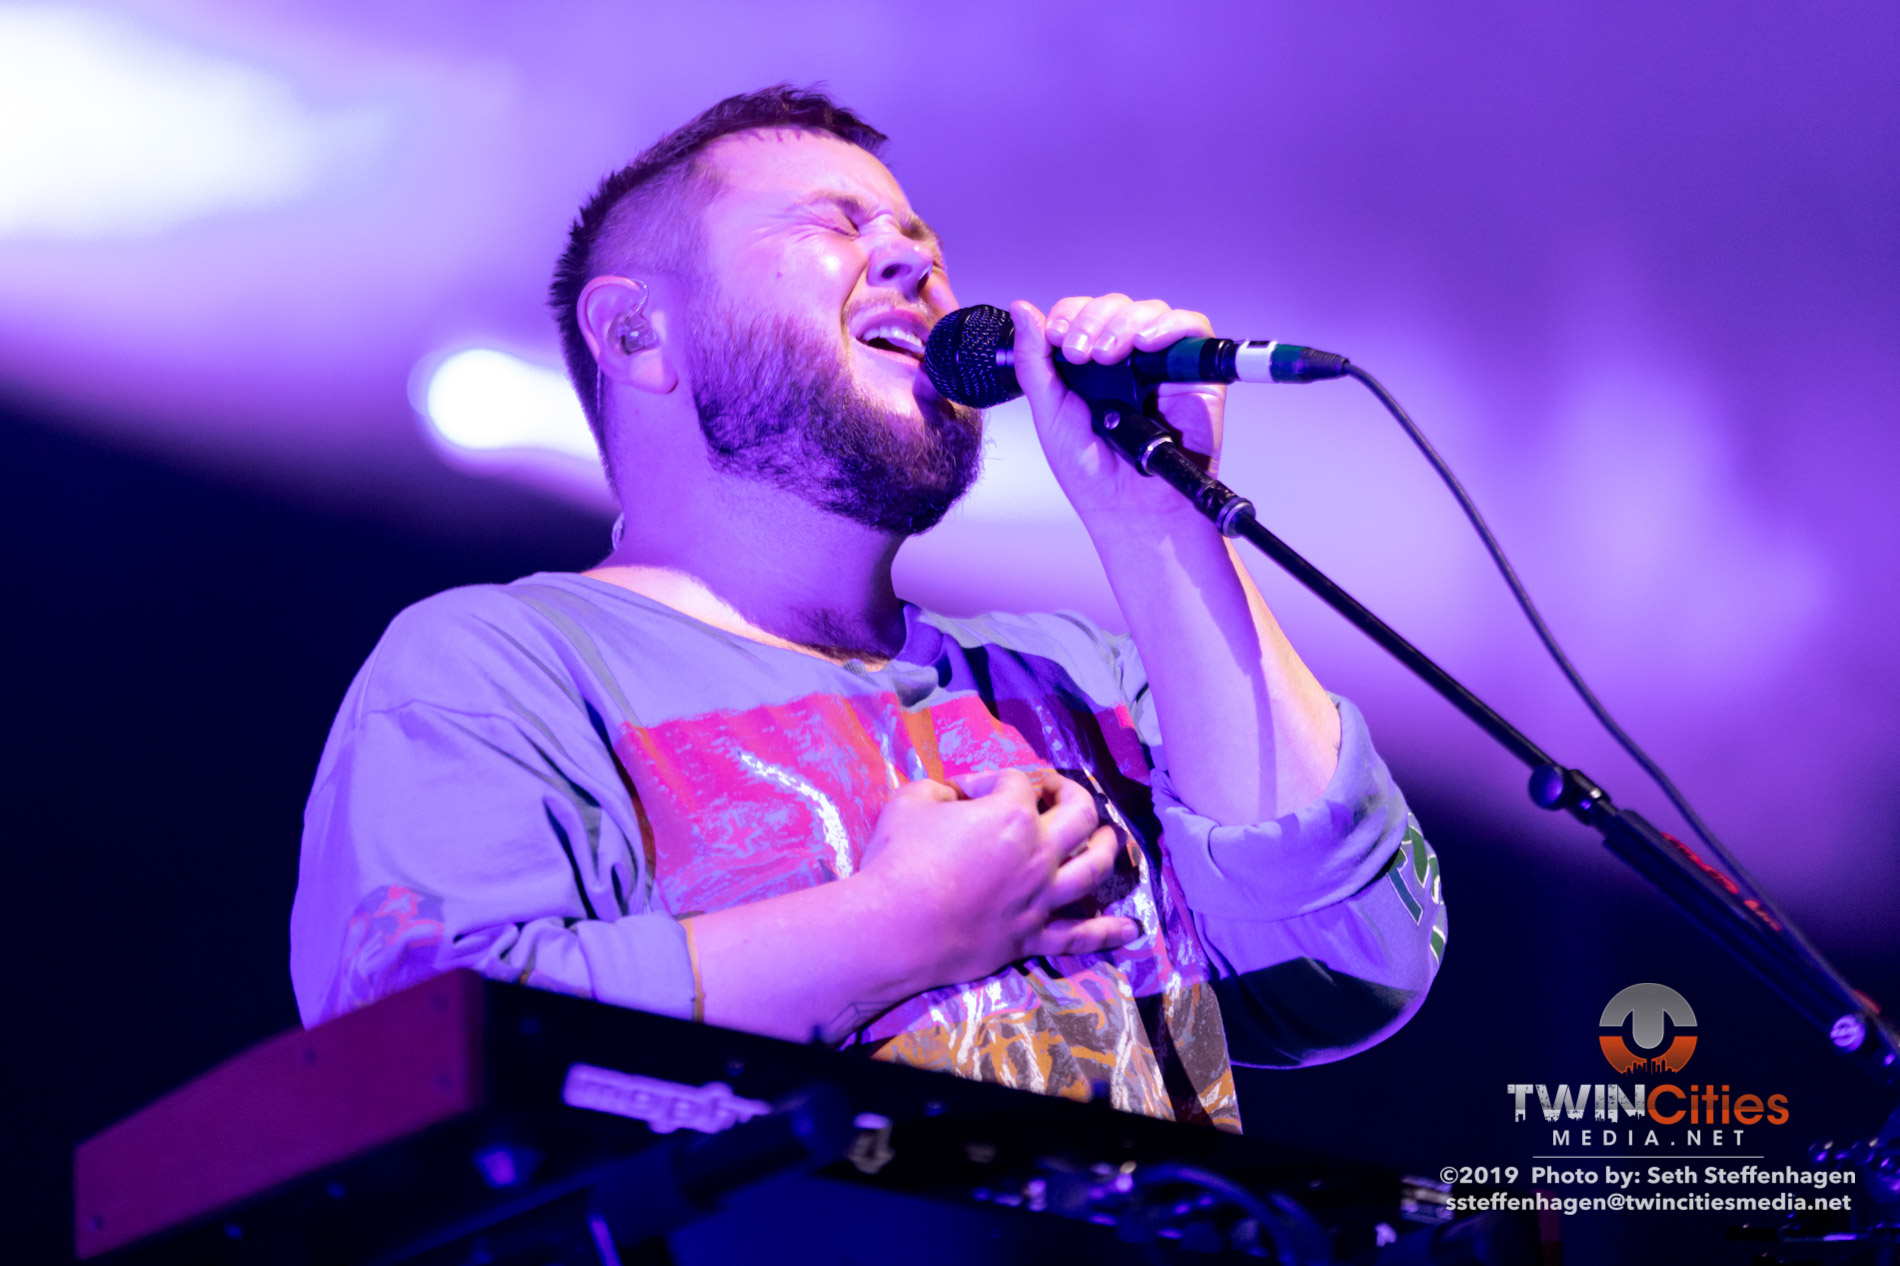 September 14, 2019 - Minneapolis, Minnesota, United States - Of Monsters And Men live in concert at Surly Brewing Festival Field along with Lower Dens as the openers.(Photo by Seth Steffenhagen/Steffenhagen Photography)